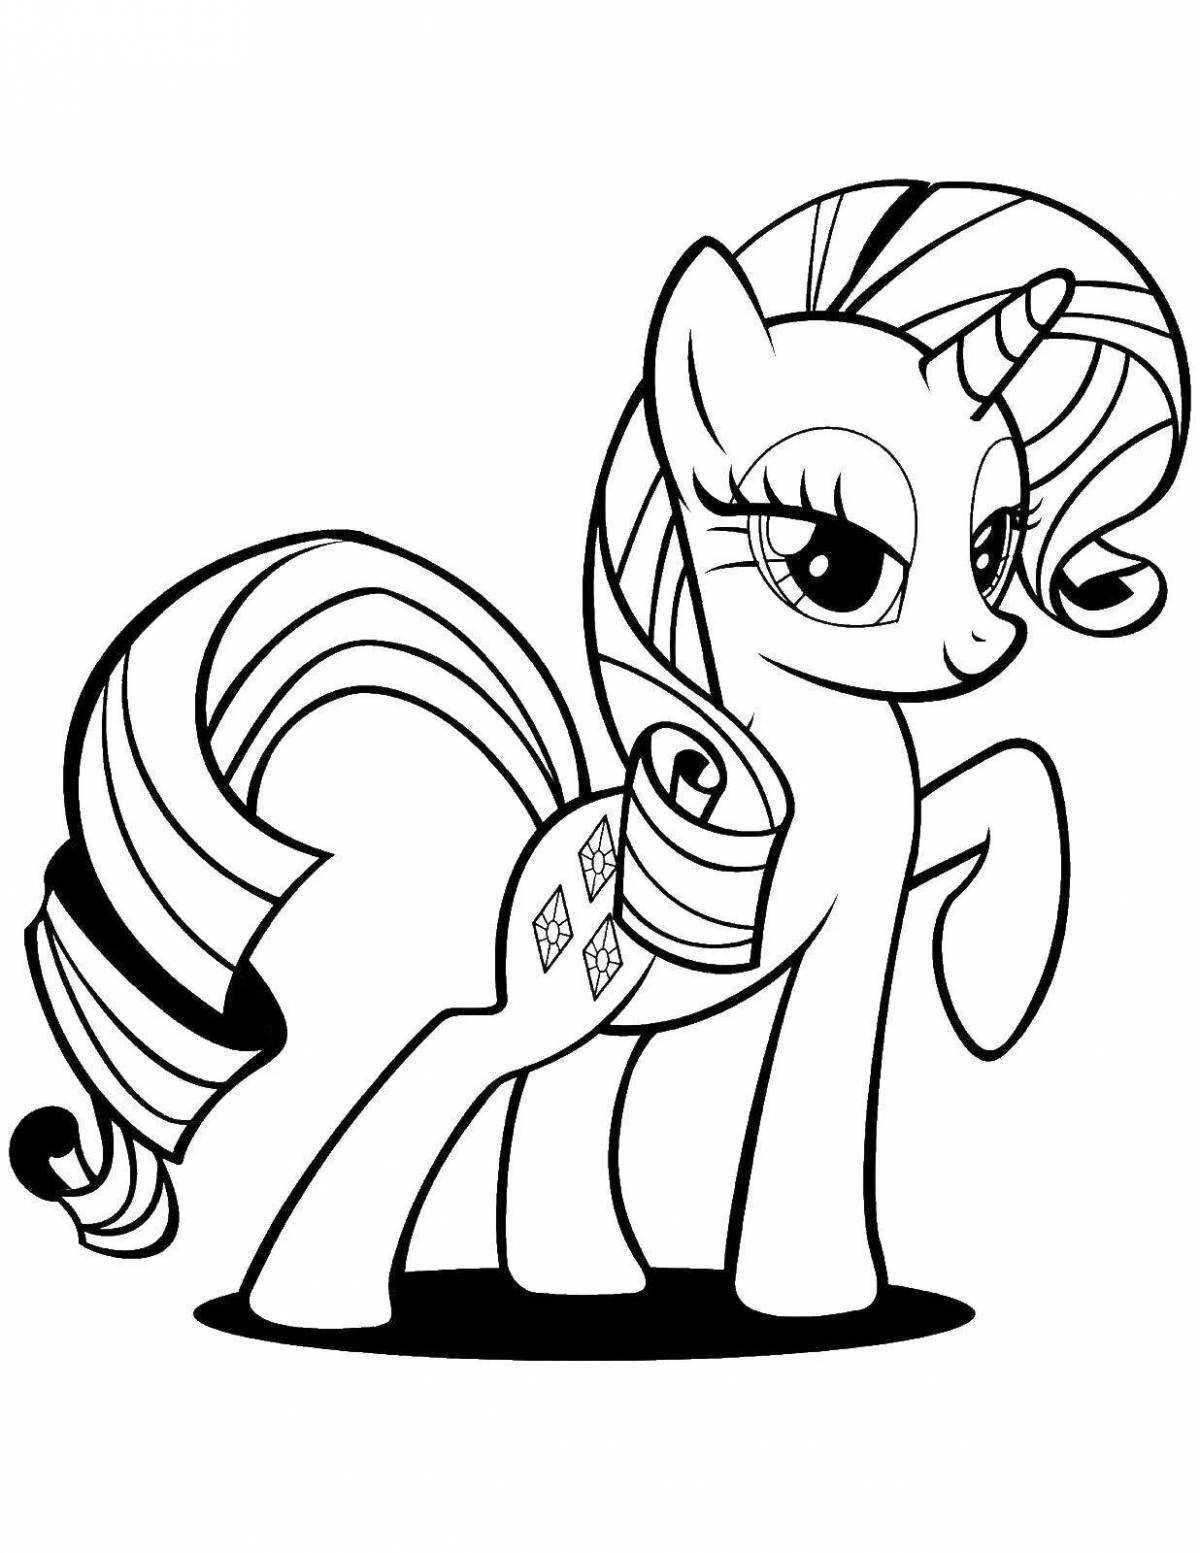 Dazzling pony coloring for girls